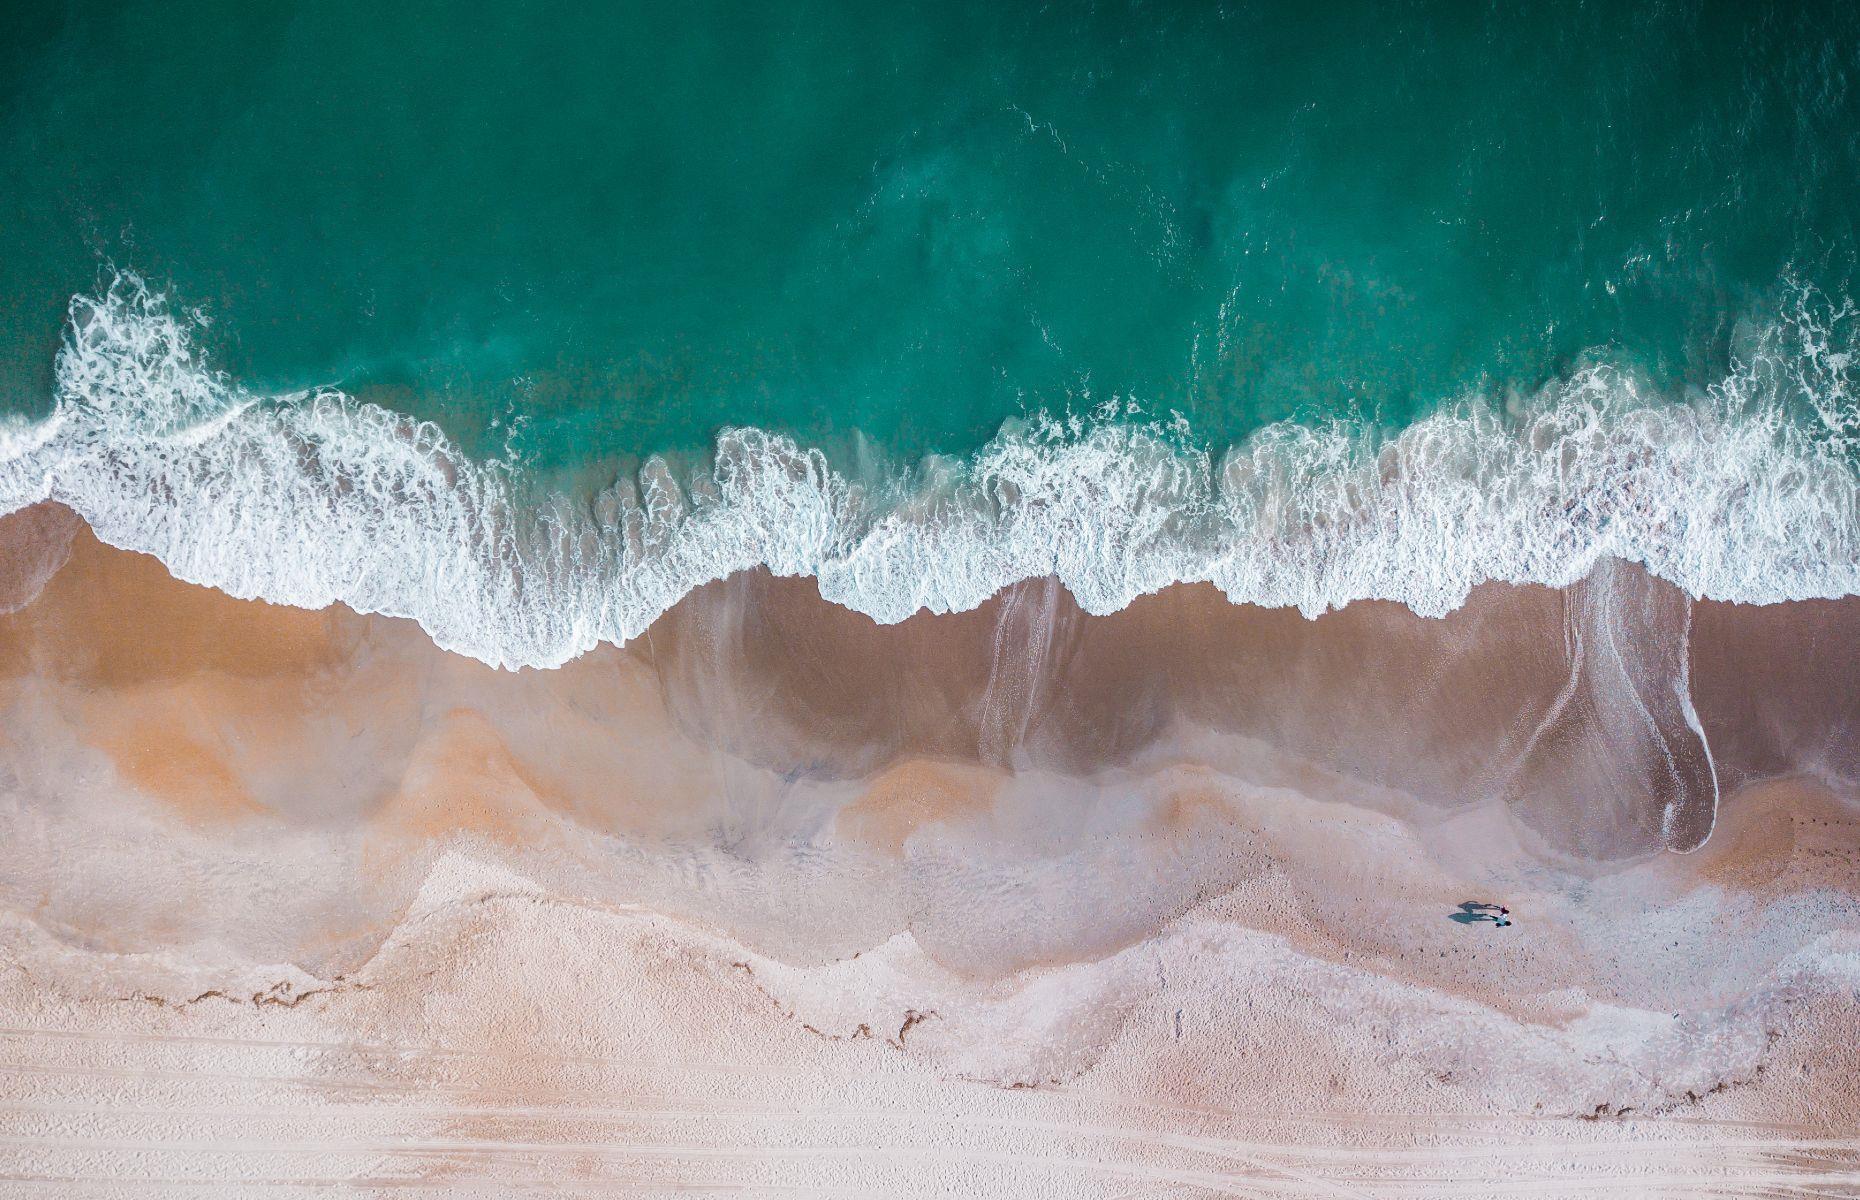 America's Most Breathtaking Beaches From The Sky